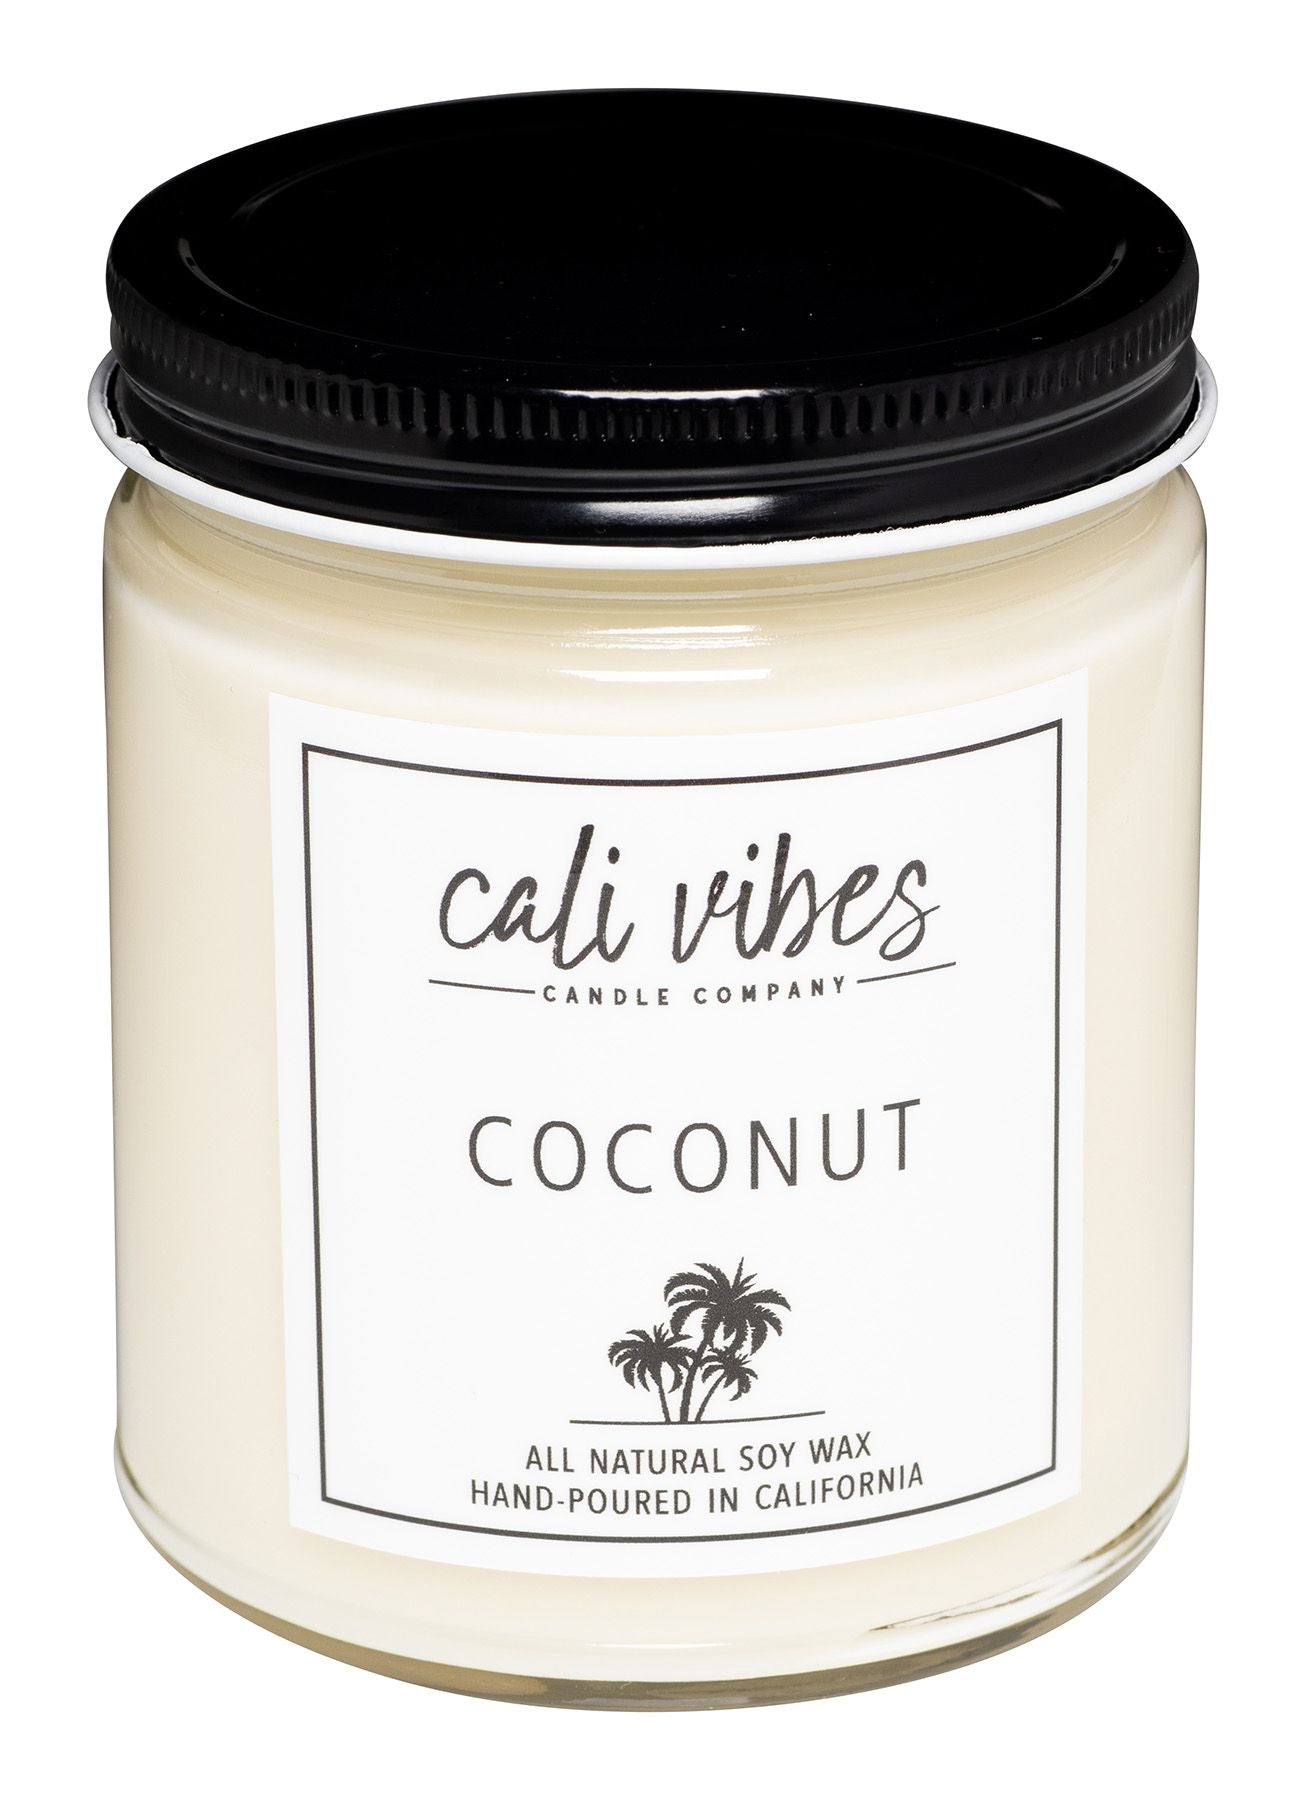 Coconut - Natural Soy Wax Candle 9oz